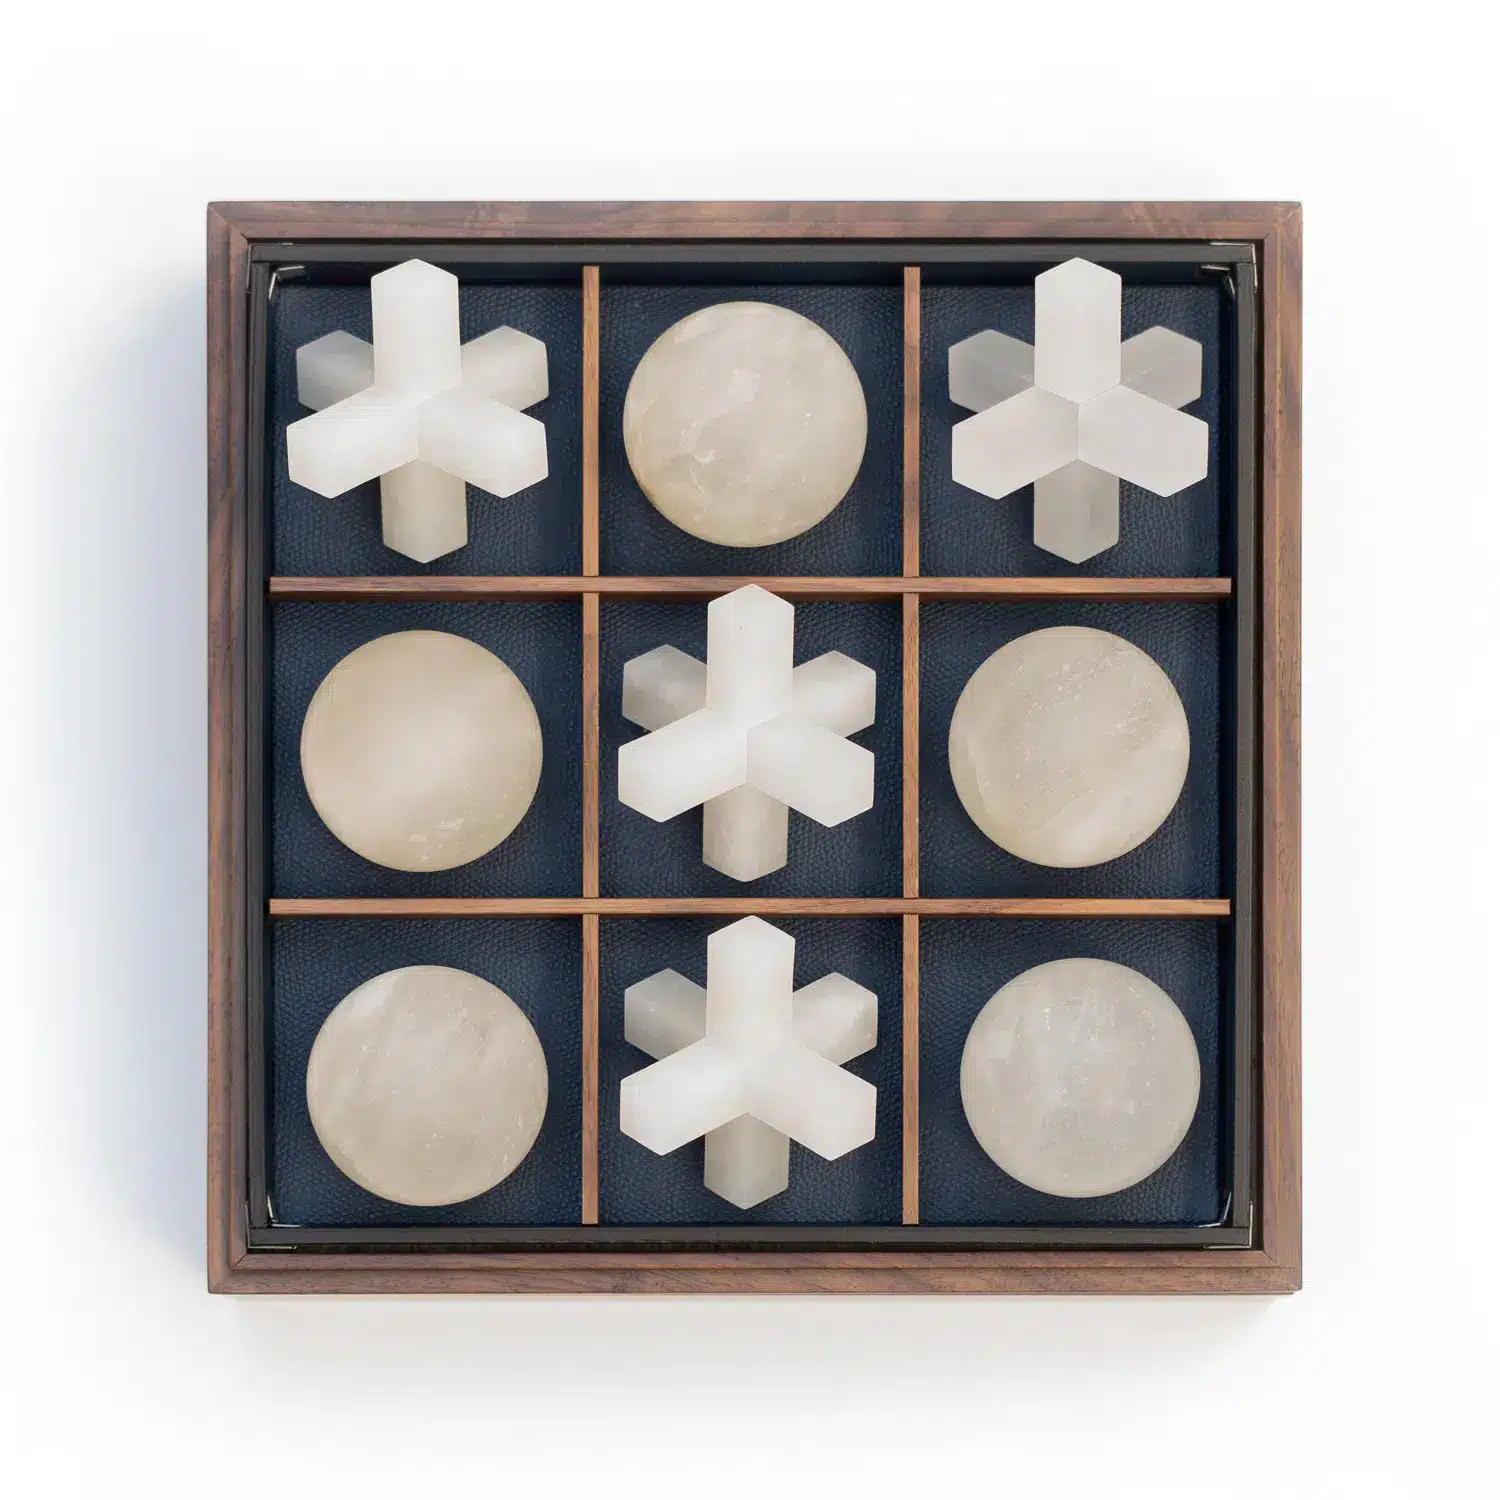 Bespoke games for gifts, this alabaster tic tac toe is a wonderful addition to any home